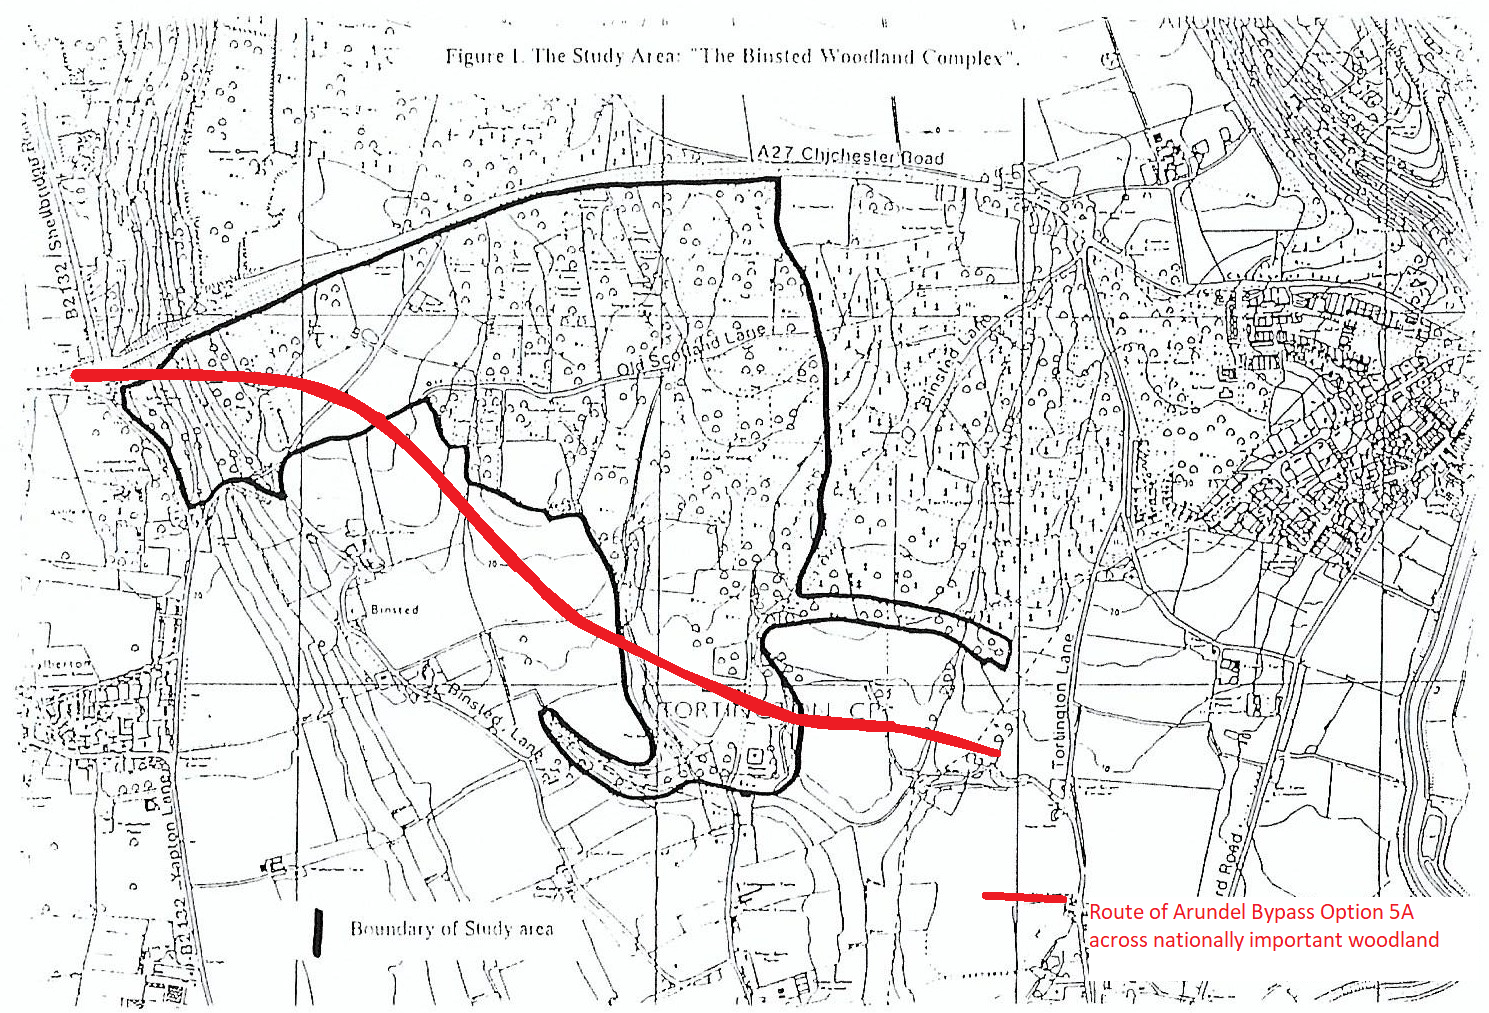 Route of Arundel Bypass across important woodland